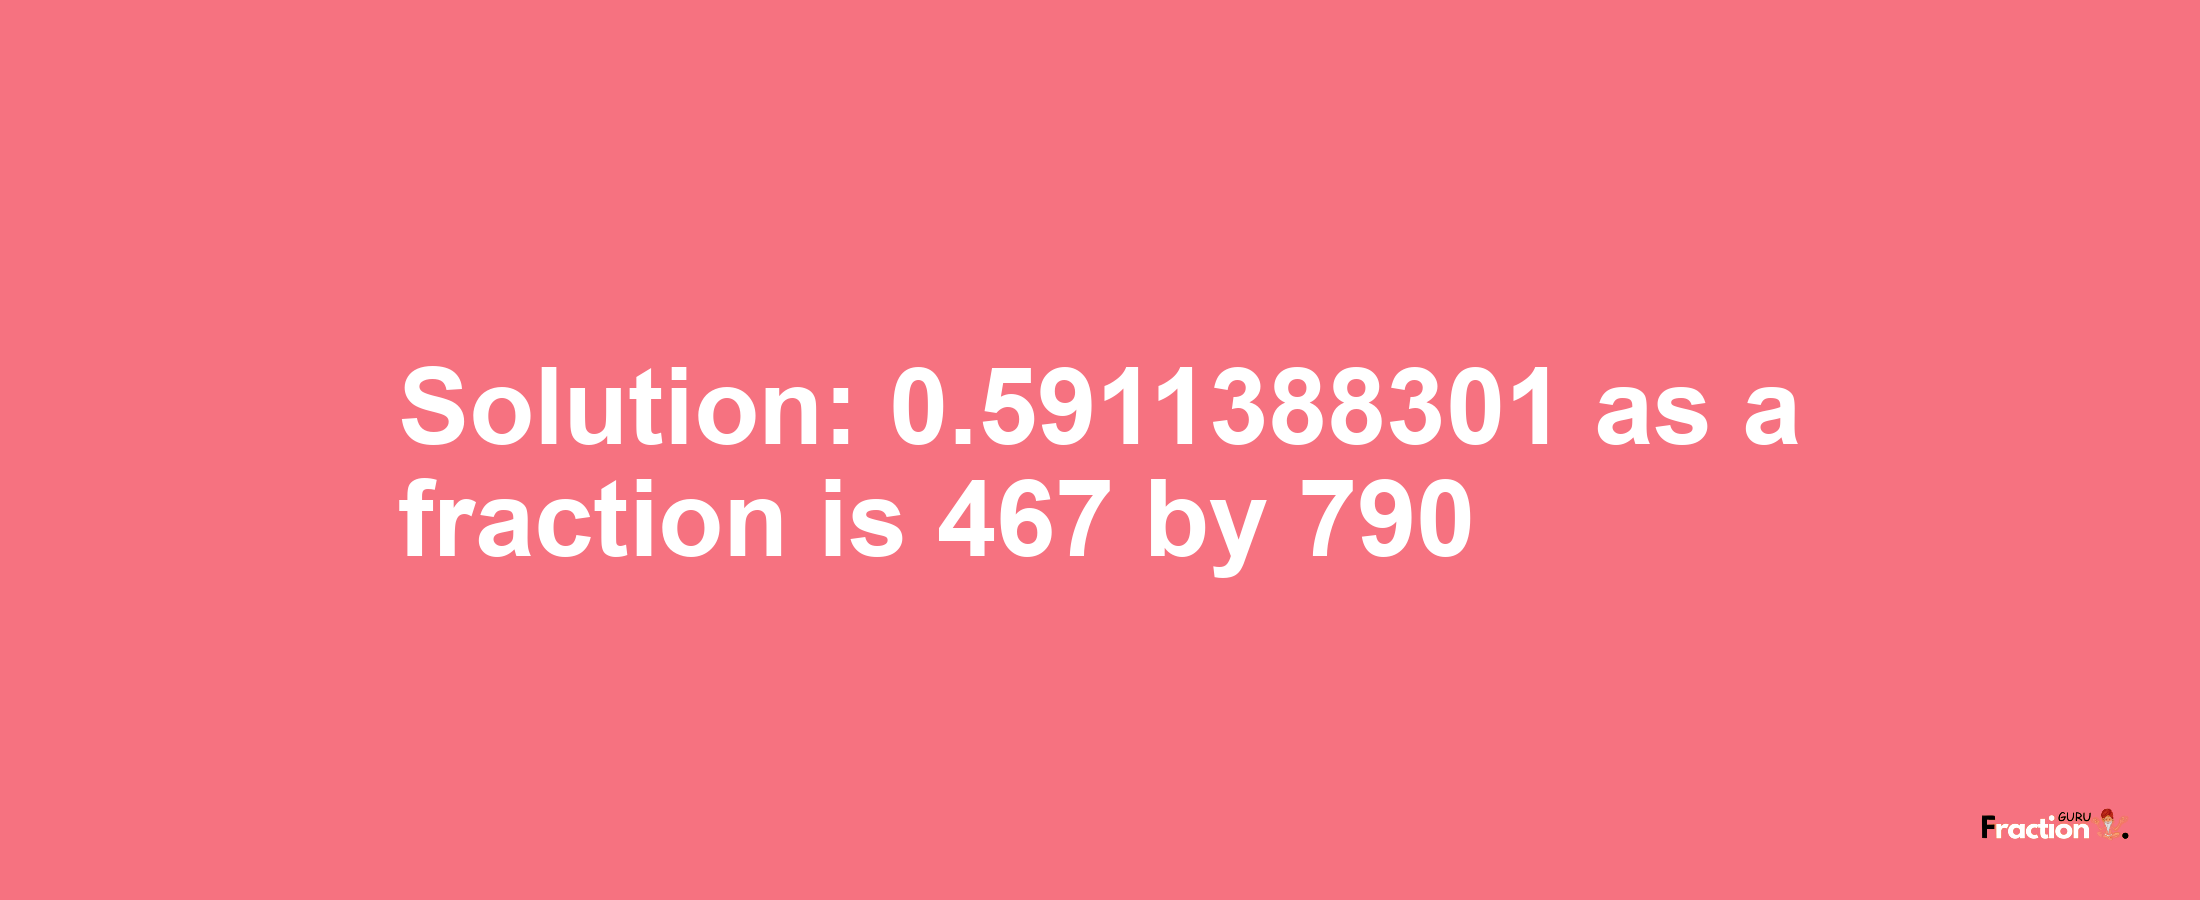 Solution:0.5911388301 as a fraction is 467/790